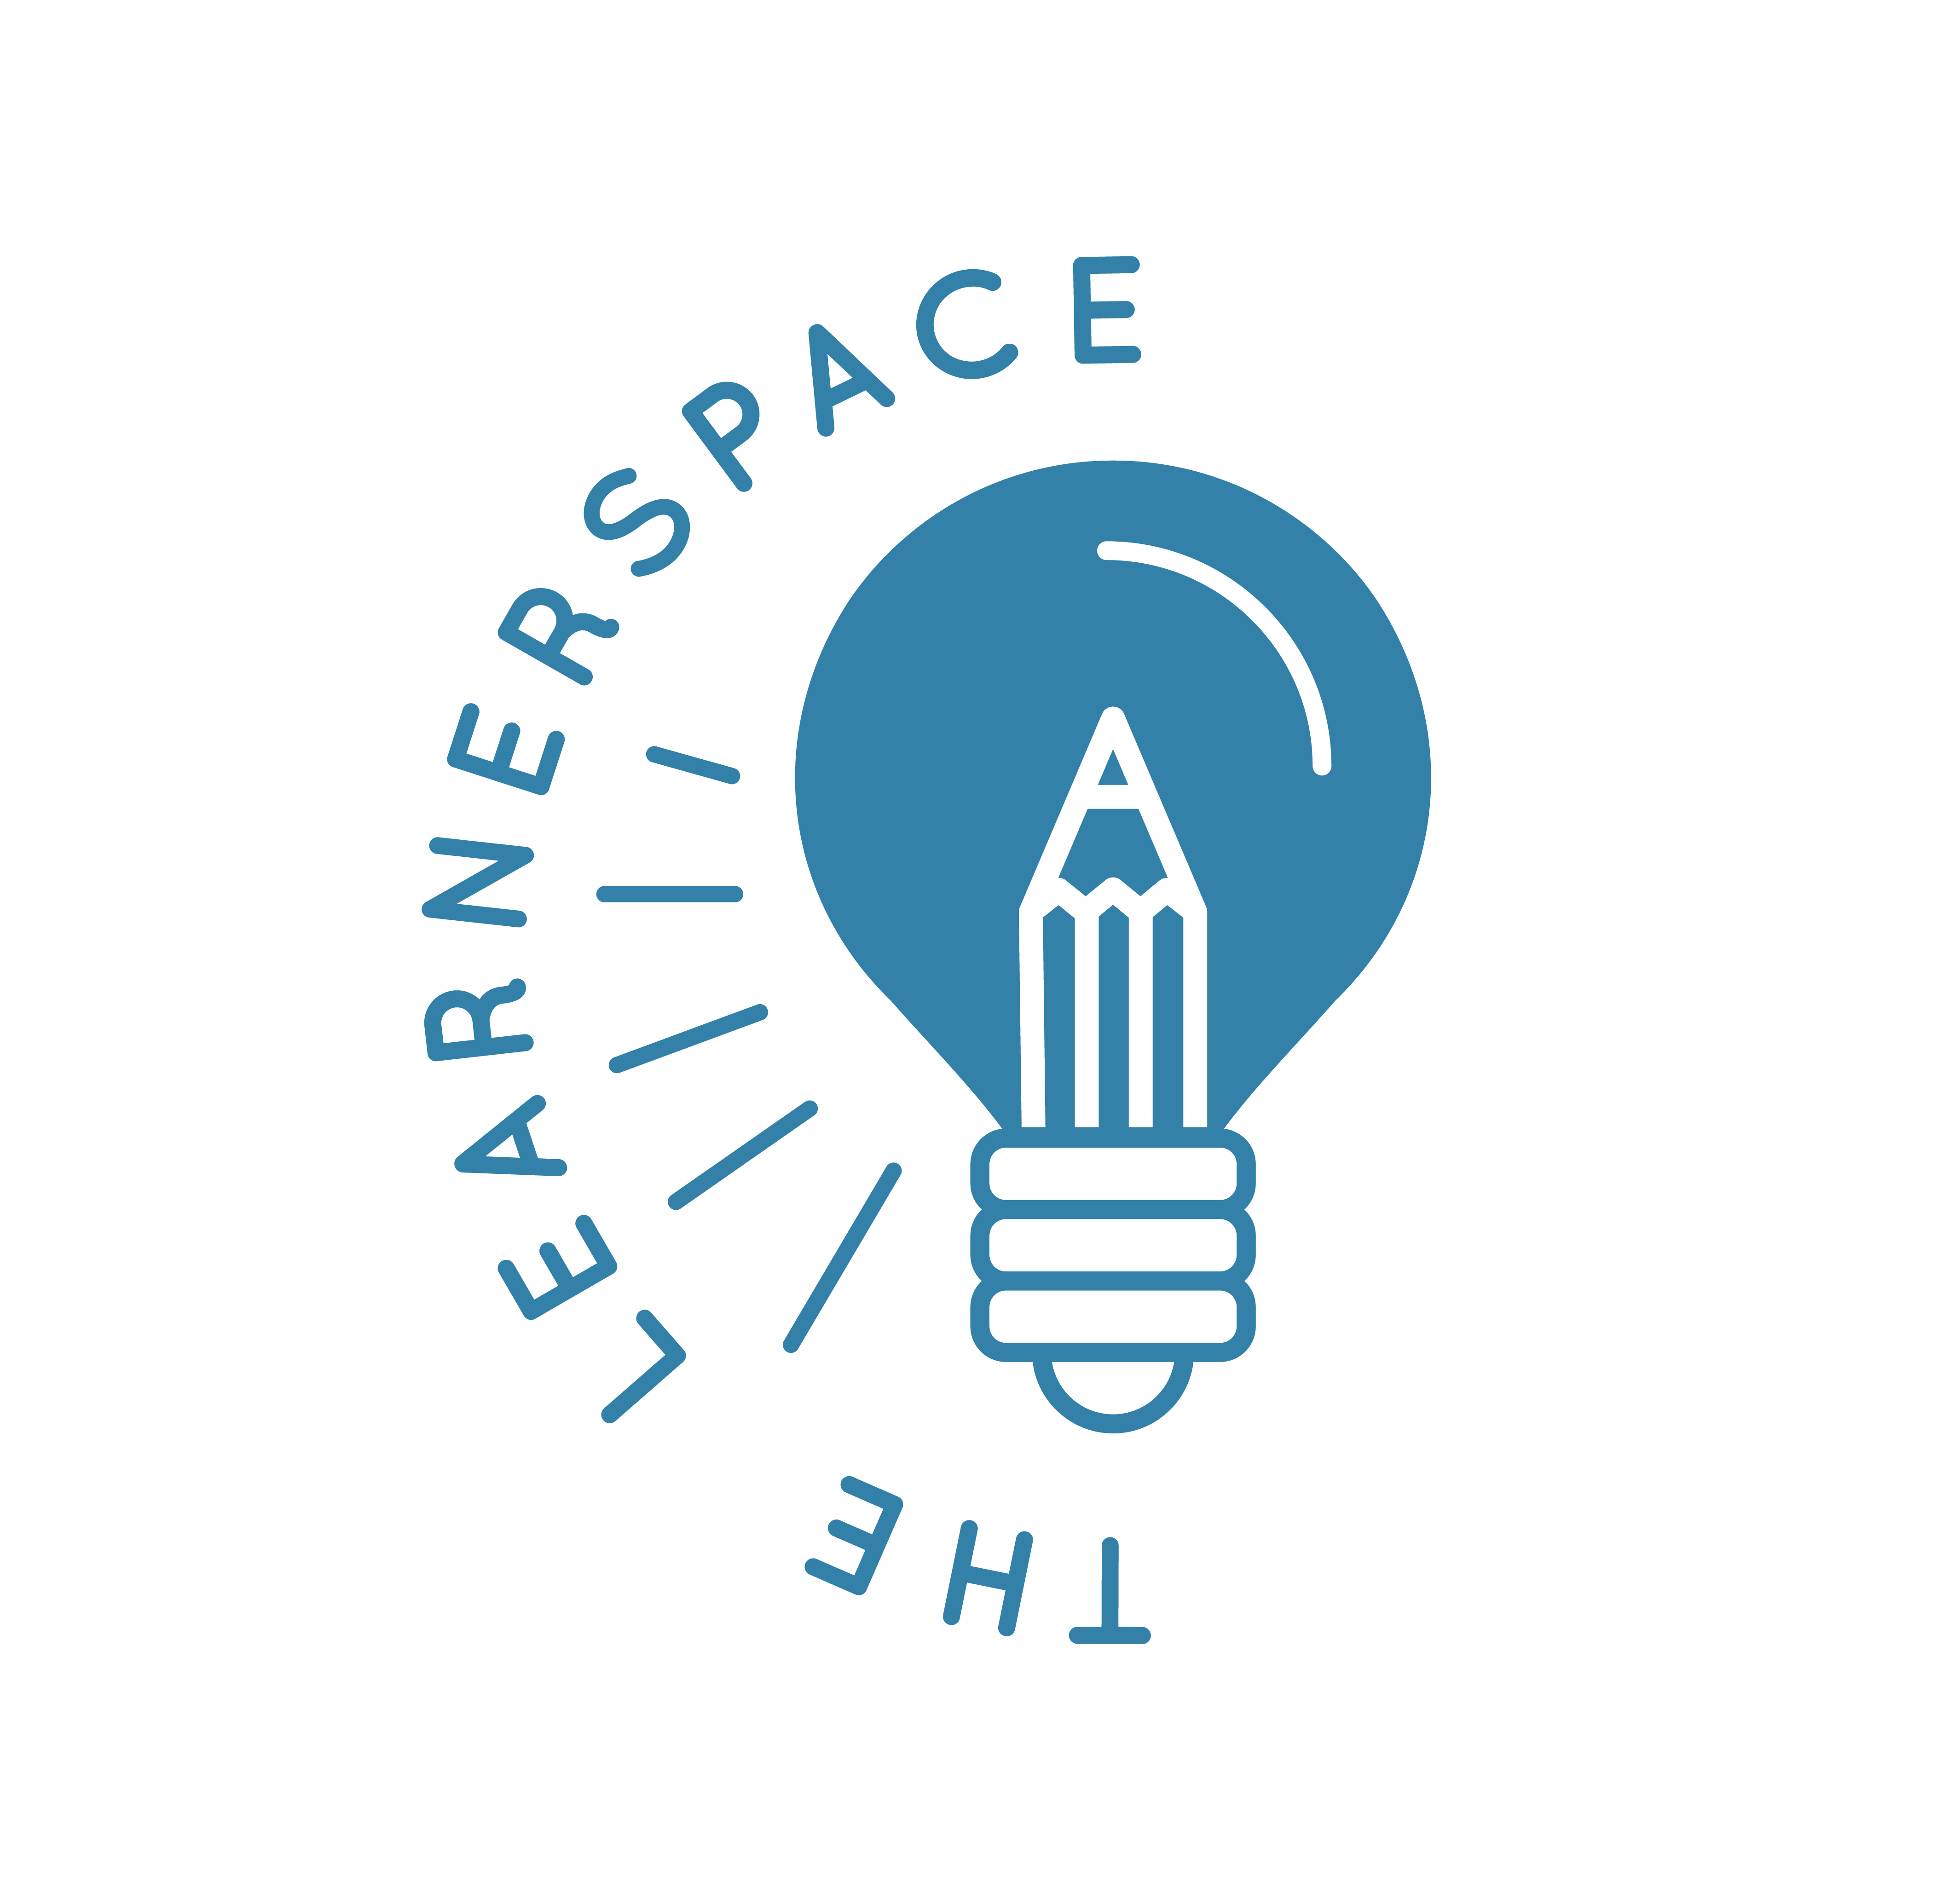 The Learnerspace-07